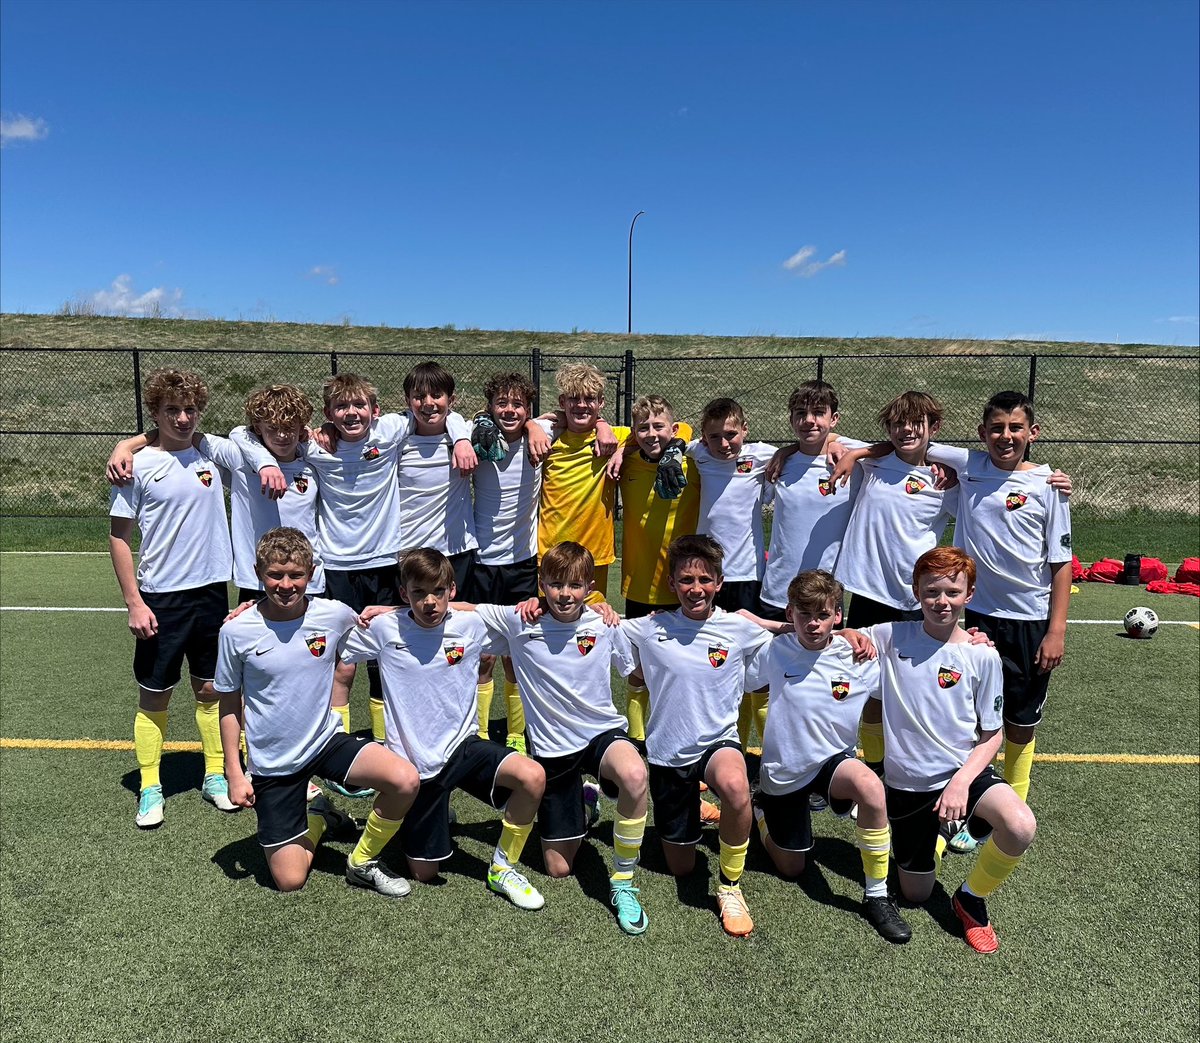 Cathy Pane, mother of 4 Real Colorado players, including Frankie, who is pictured on the 2011 National team, lost her battle with cancer 1 year ago on April 28th, 2023. In her honor the boys wore yellow socks on April 28th which celebrated her favorite color. #ThisIsReal